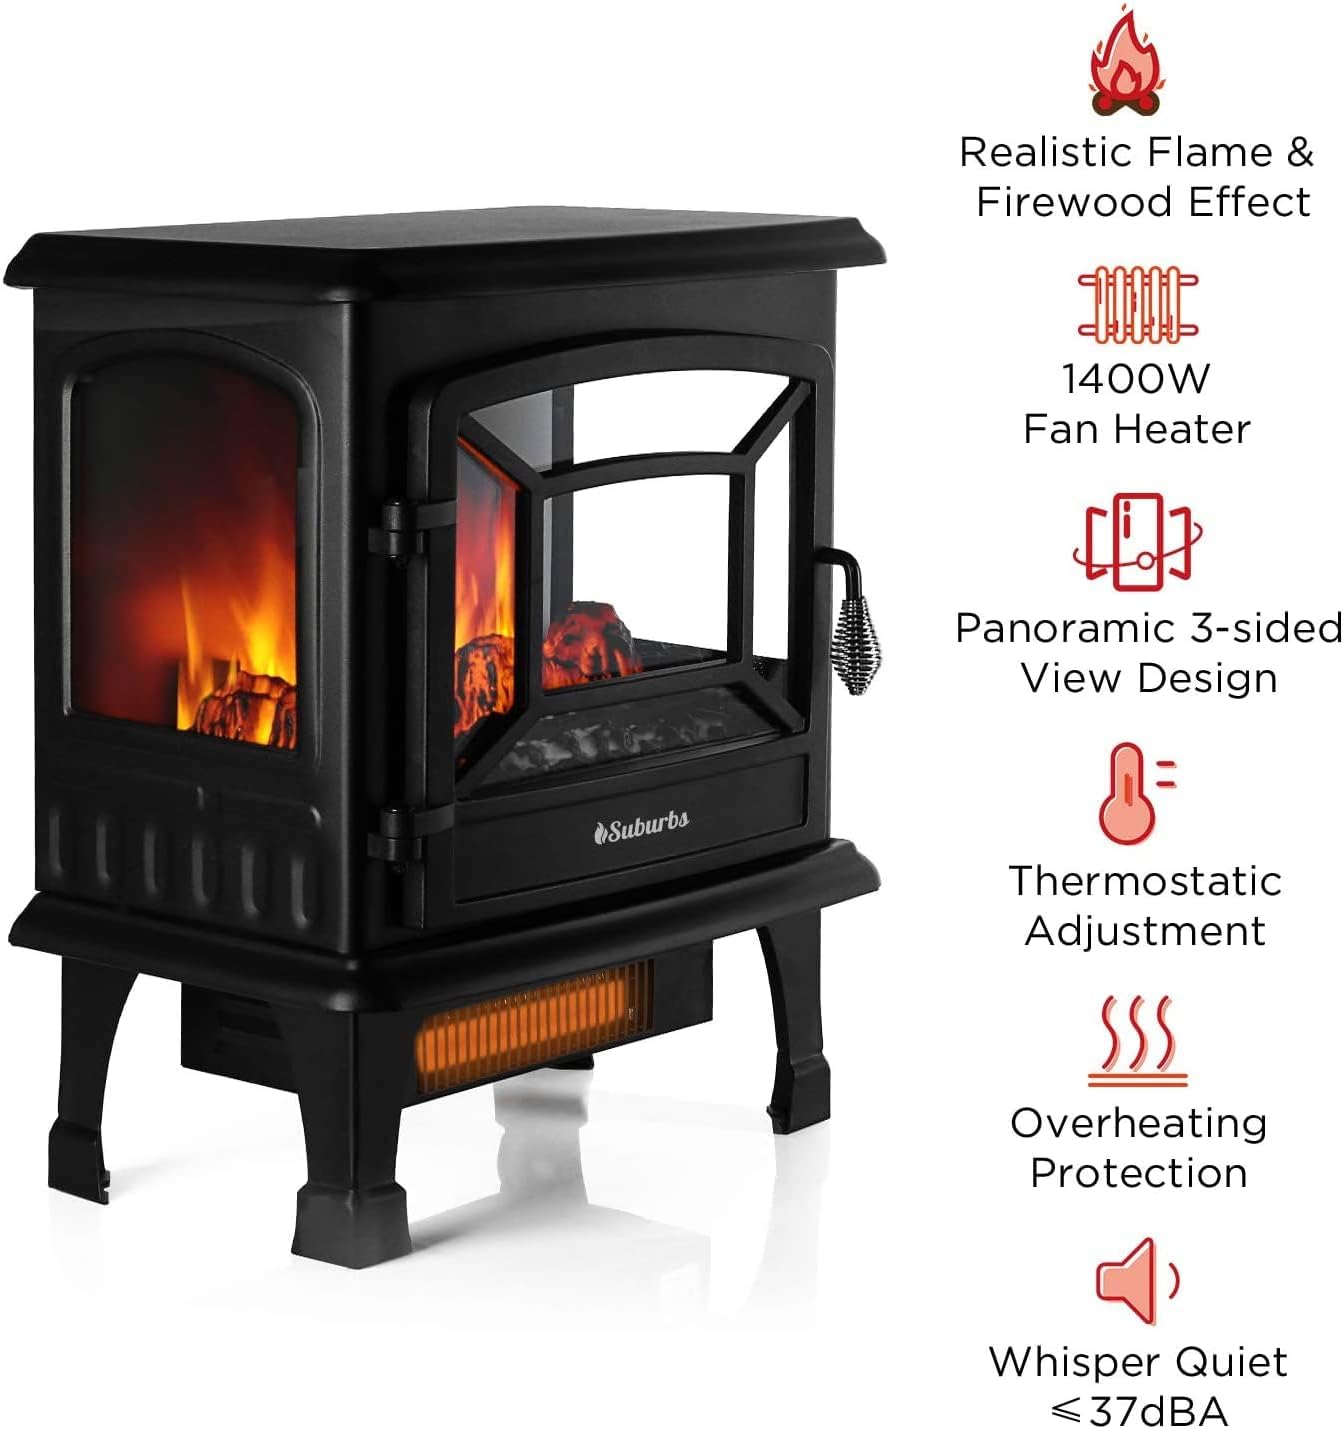 TURBRO Suburbs 20 in. Electric Fireplace Infrared Heater with Crackling Sound, Realistic Flame Effect, CSA Certified